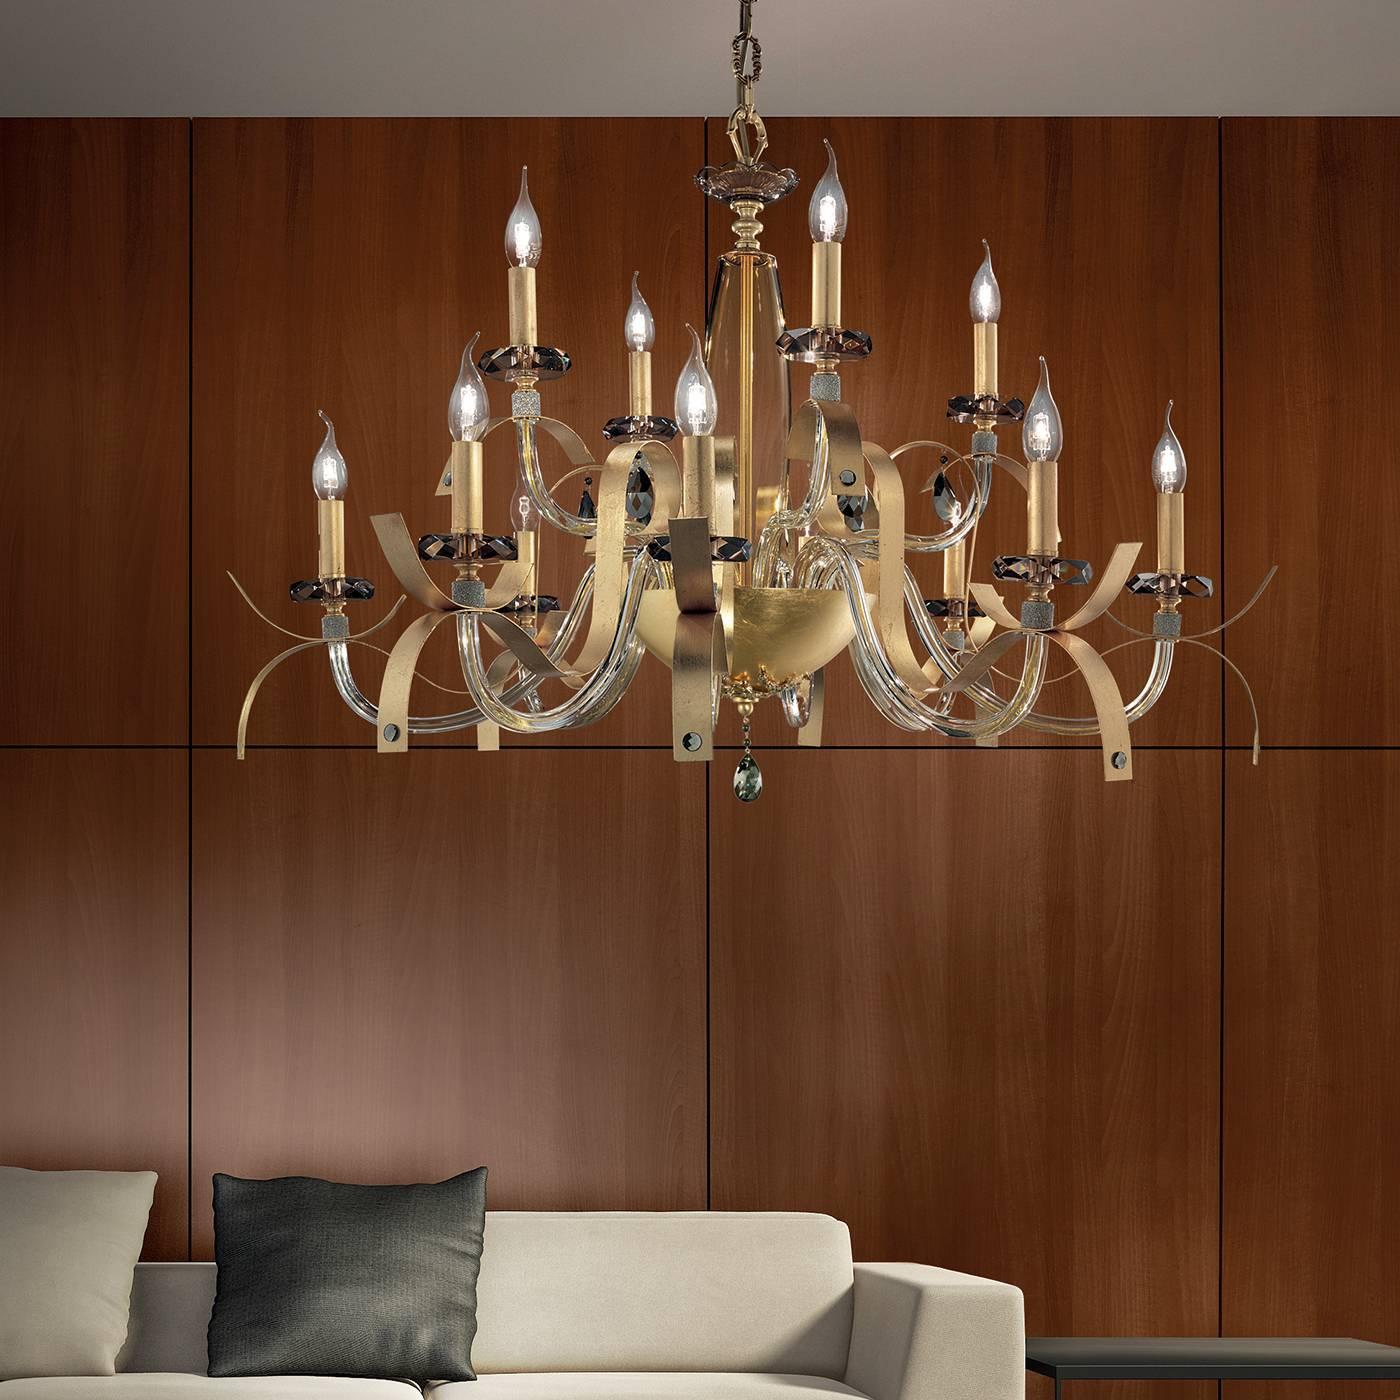 The graceful decorative elements of this superb piece are inspired by the classic Venetian pastoral chandelier. Handcrafted of glass, its complex structure comprises a central body in a delicate amber color, two tiered elements with eight + four